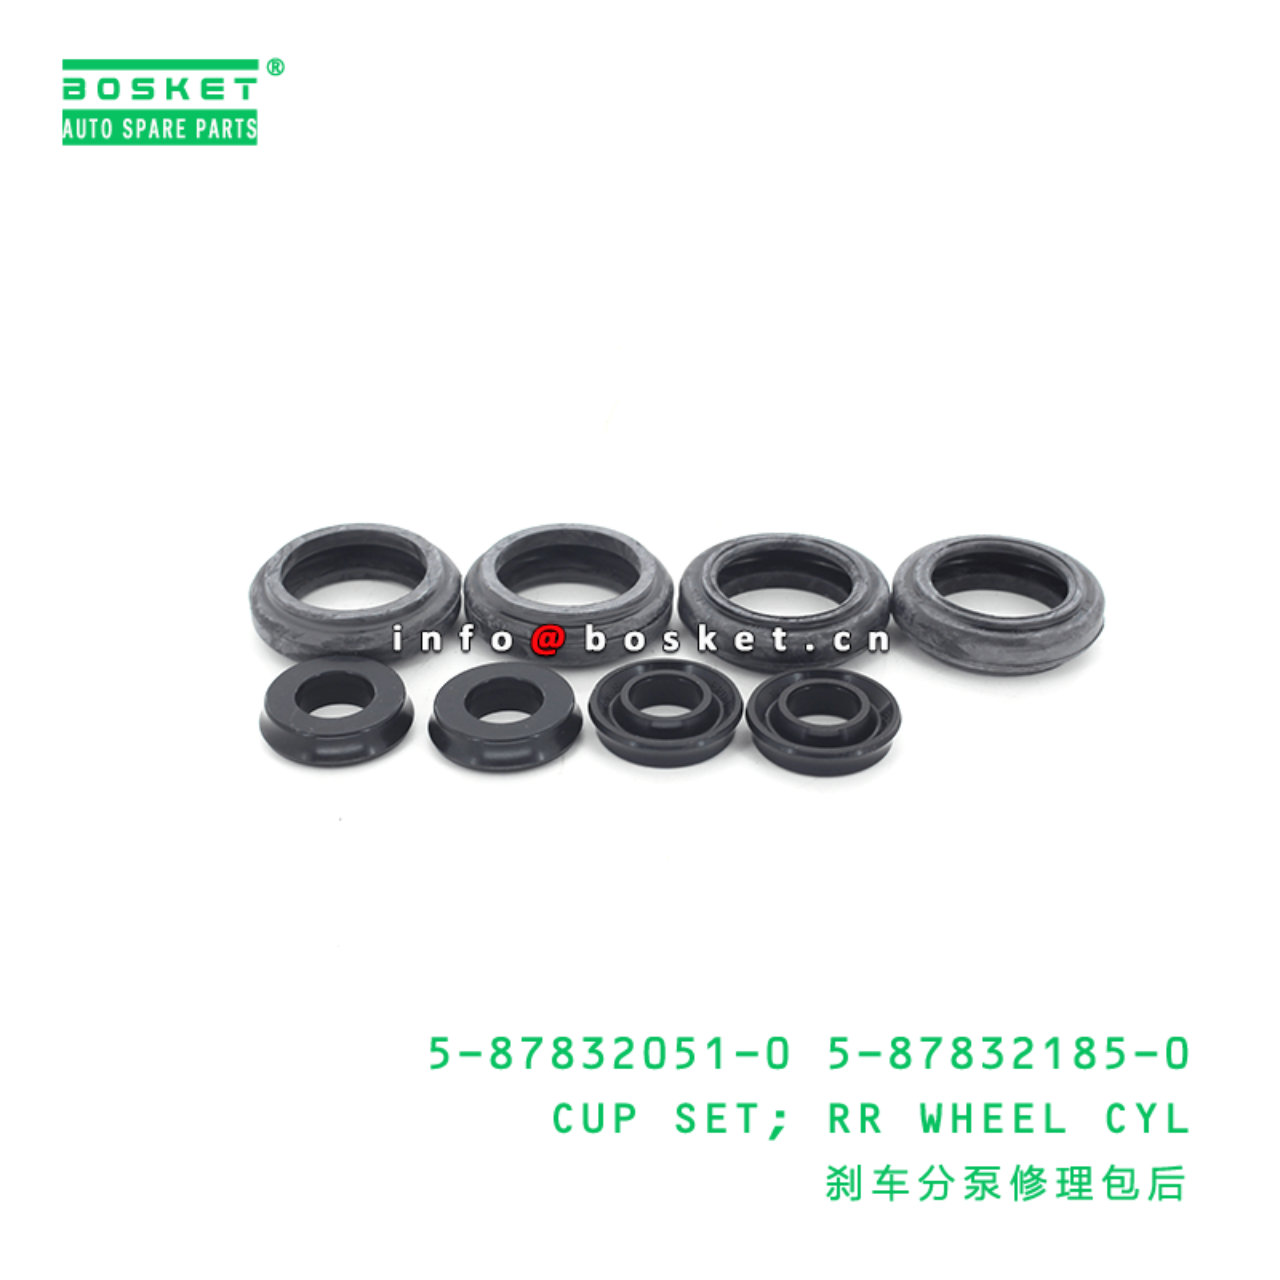 5-87832051-0 5-87832185-0 Rear Wheel Cylinder Cup Set 5878320510 5878321850 Suitable for ISUZU 700P 